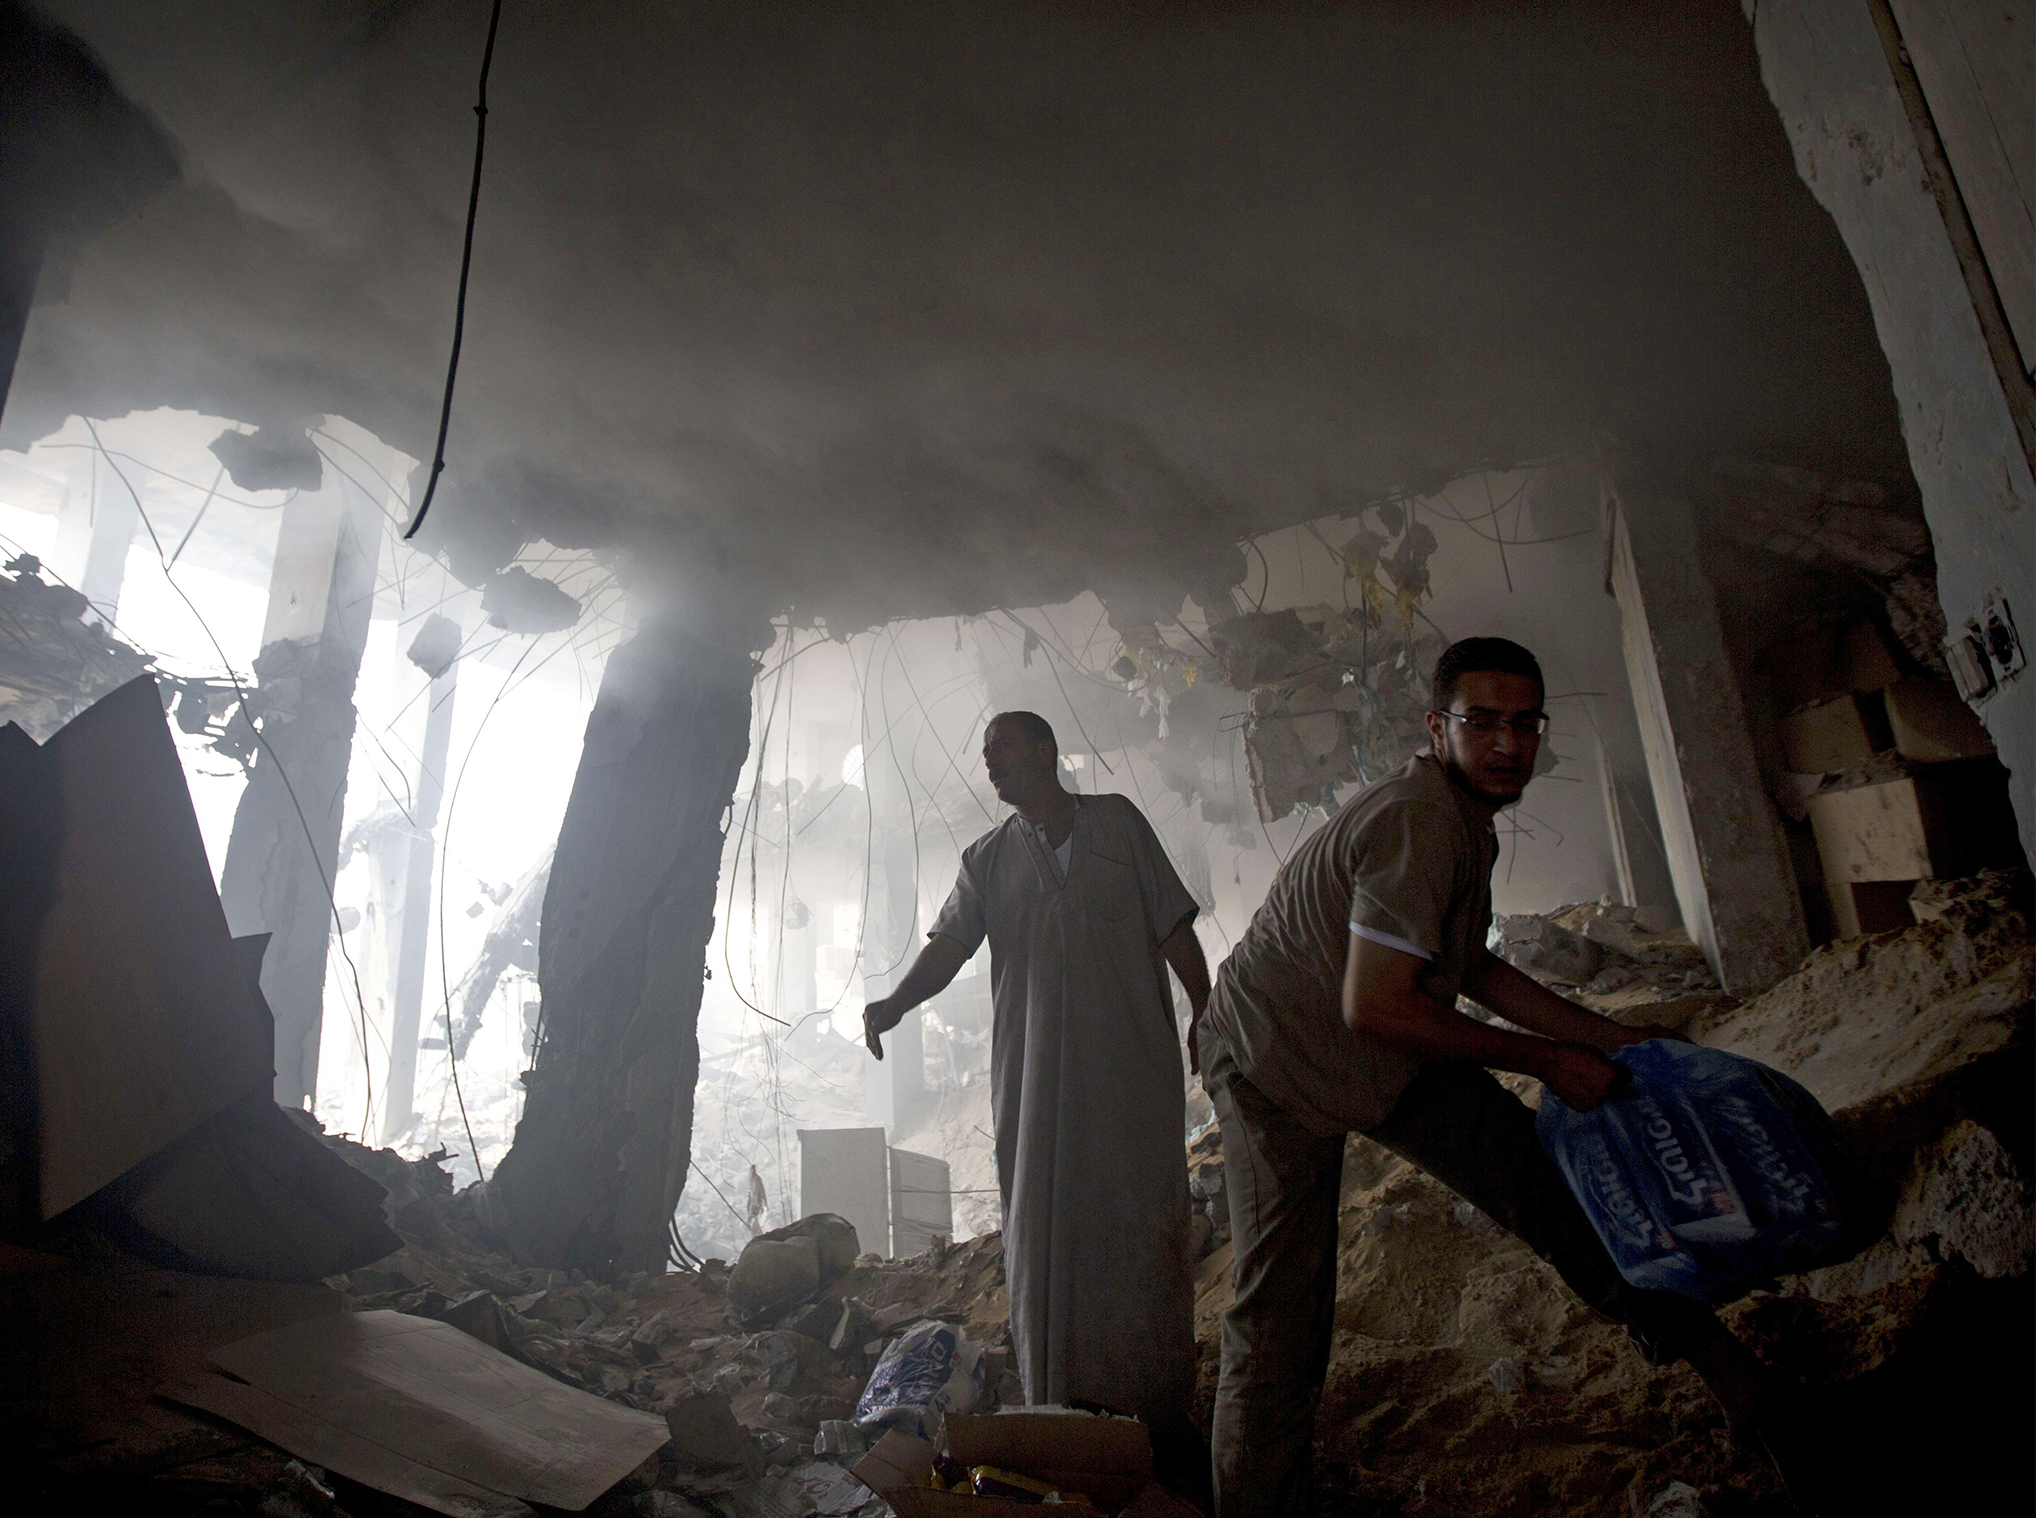 Palestinian men remove goods from the rubble of a destroyed store located on the ground floor of a building hit by an Israeli air strike